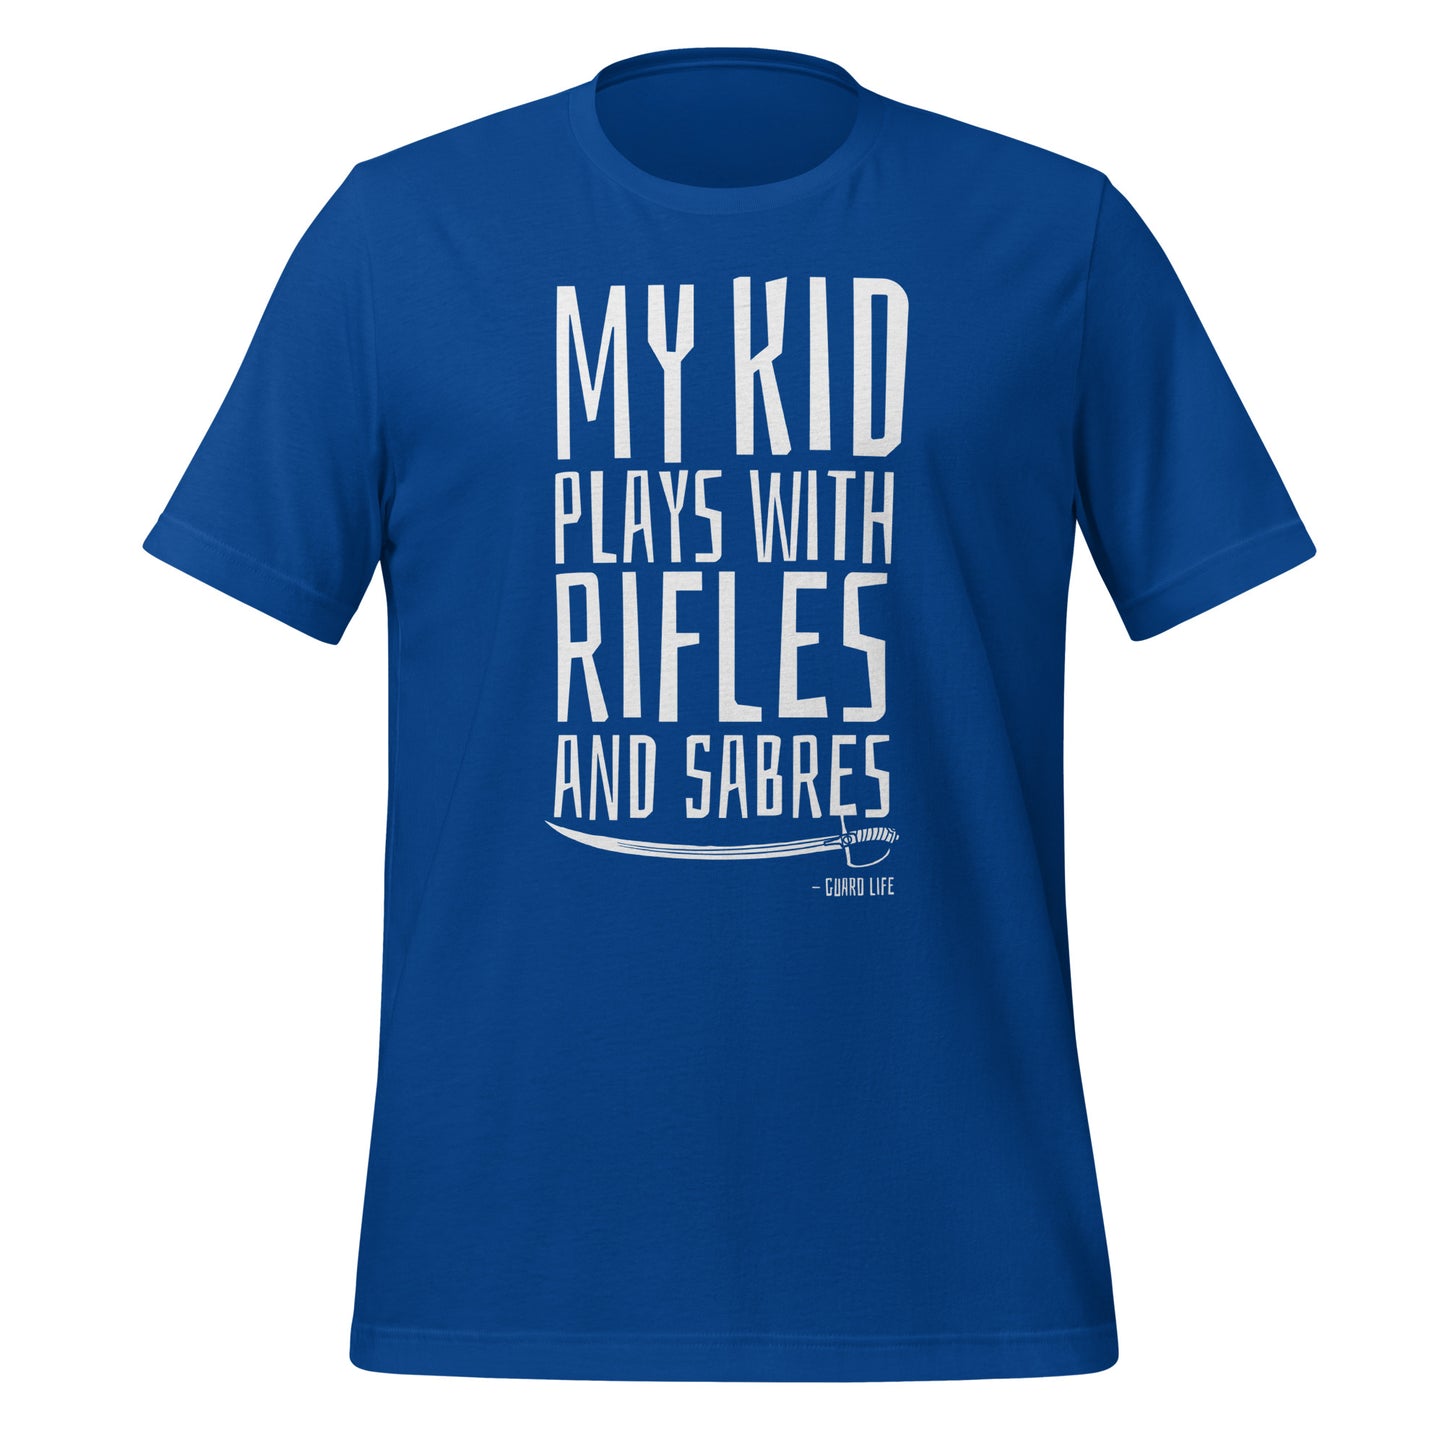 My kid plays with rifles and sabres (Color Guard) Adult T-shirt